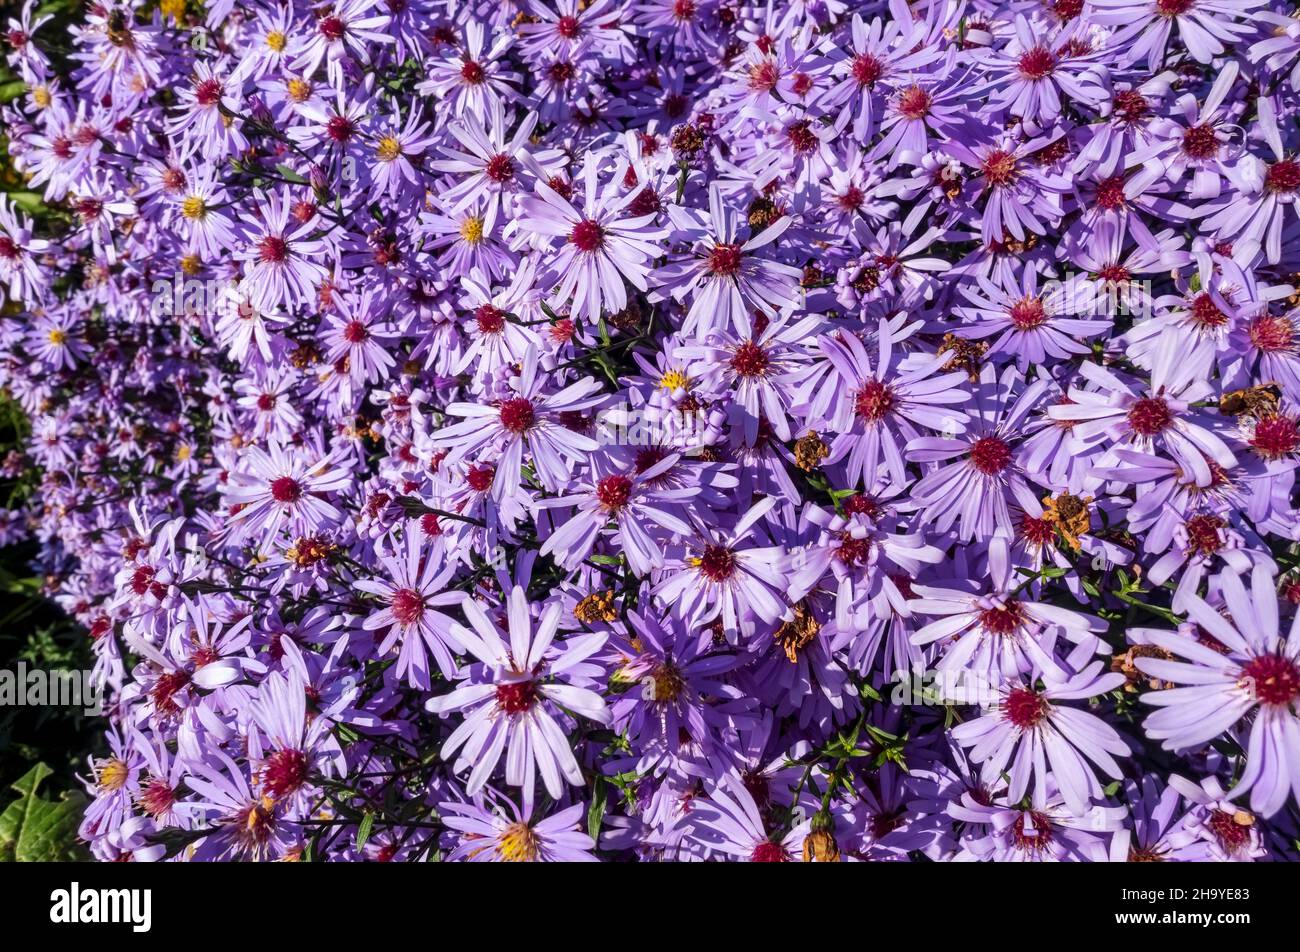 Close up of purple aster flower flowers flowering michaelmas daisy growing in the garden in autumn England UK United Kingdom GB Great Britain Stock Photo